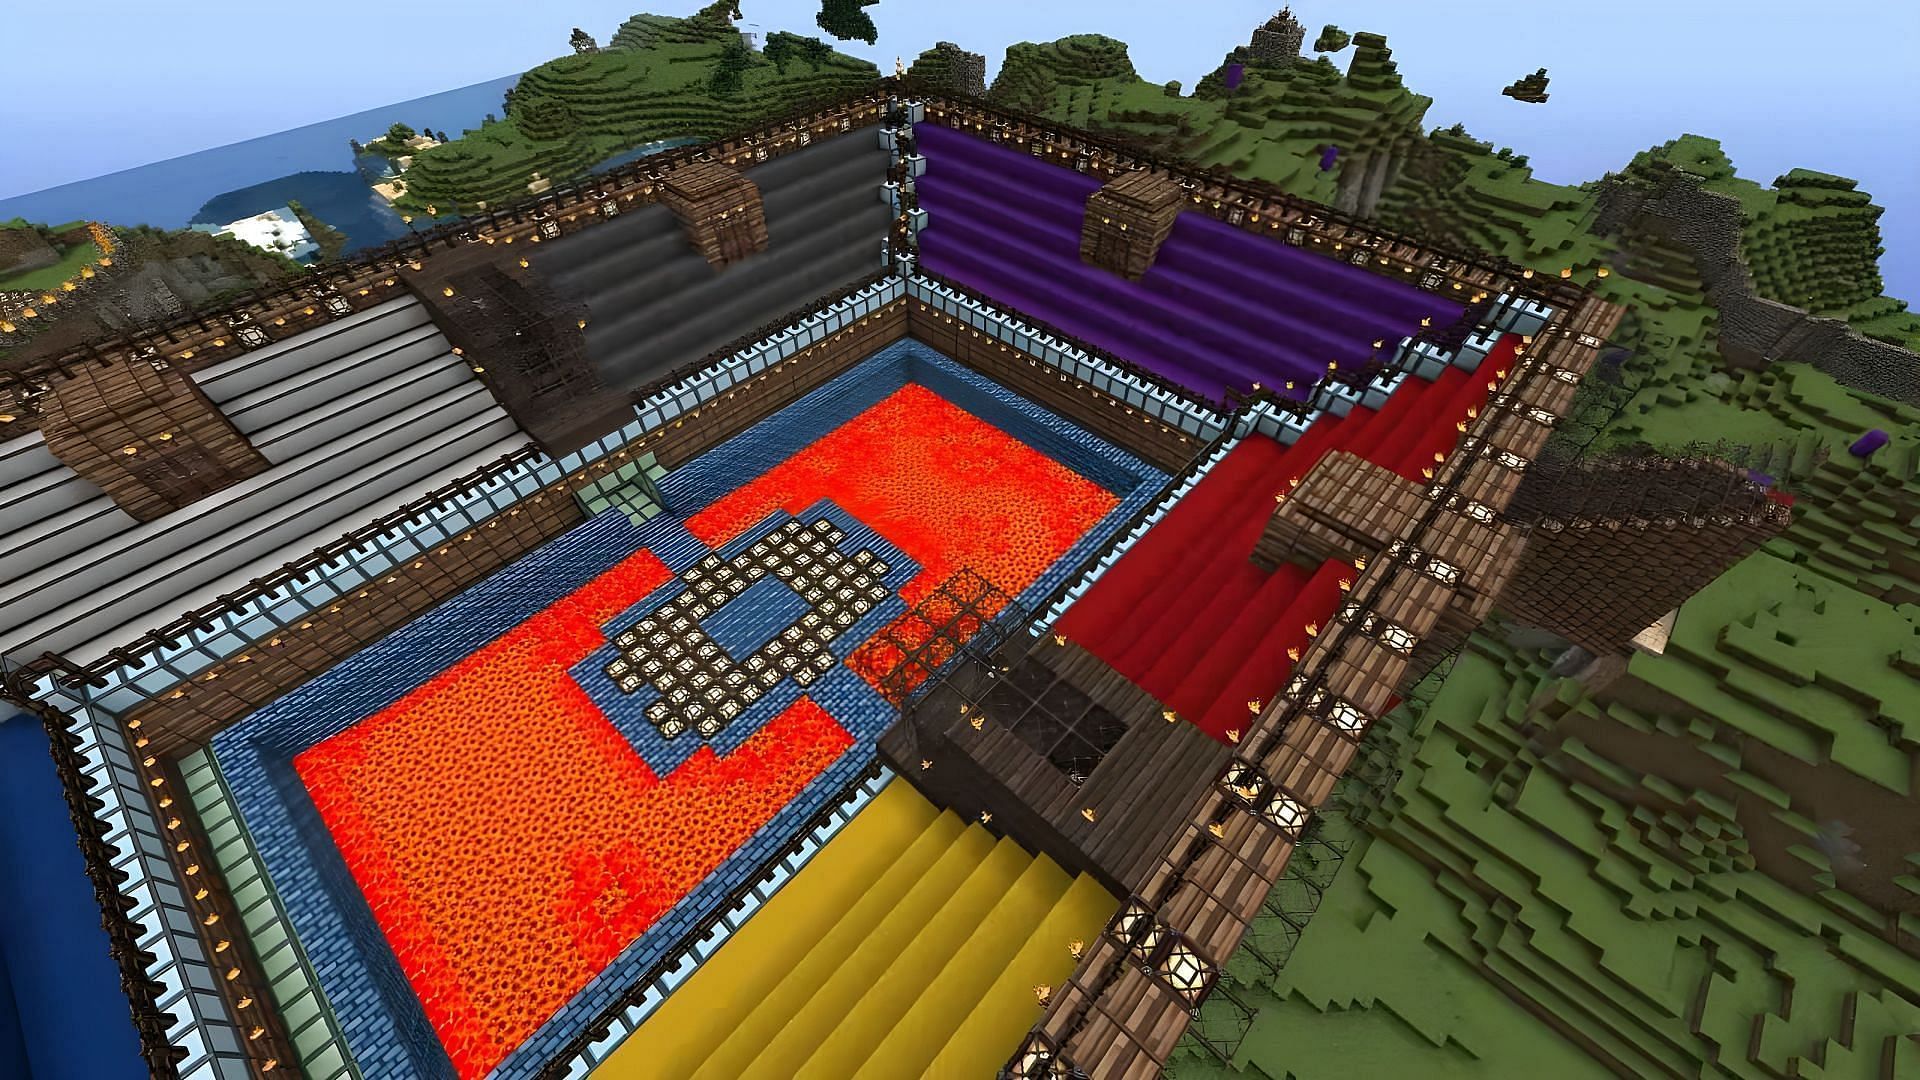 PVP arena is a good build ideas for multiplayer servers (Image via Youtube/Annowins)